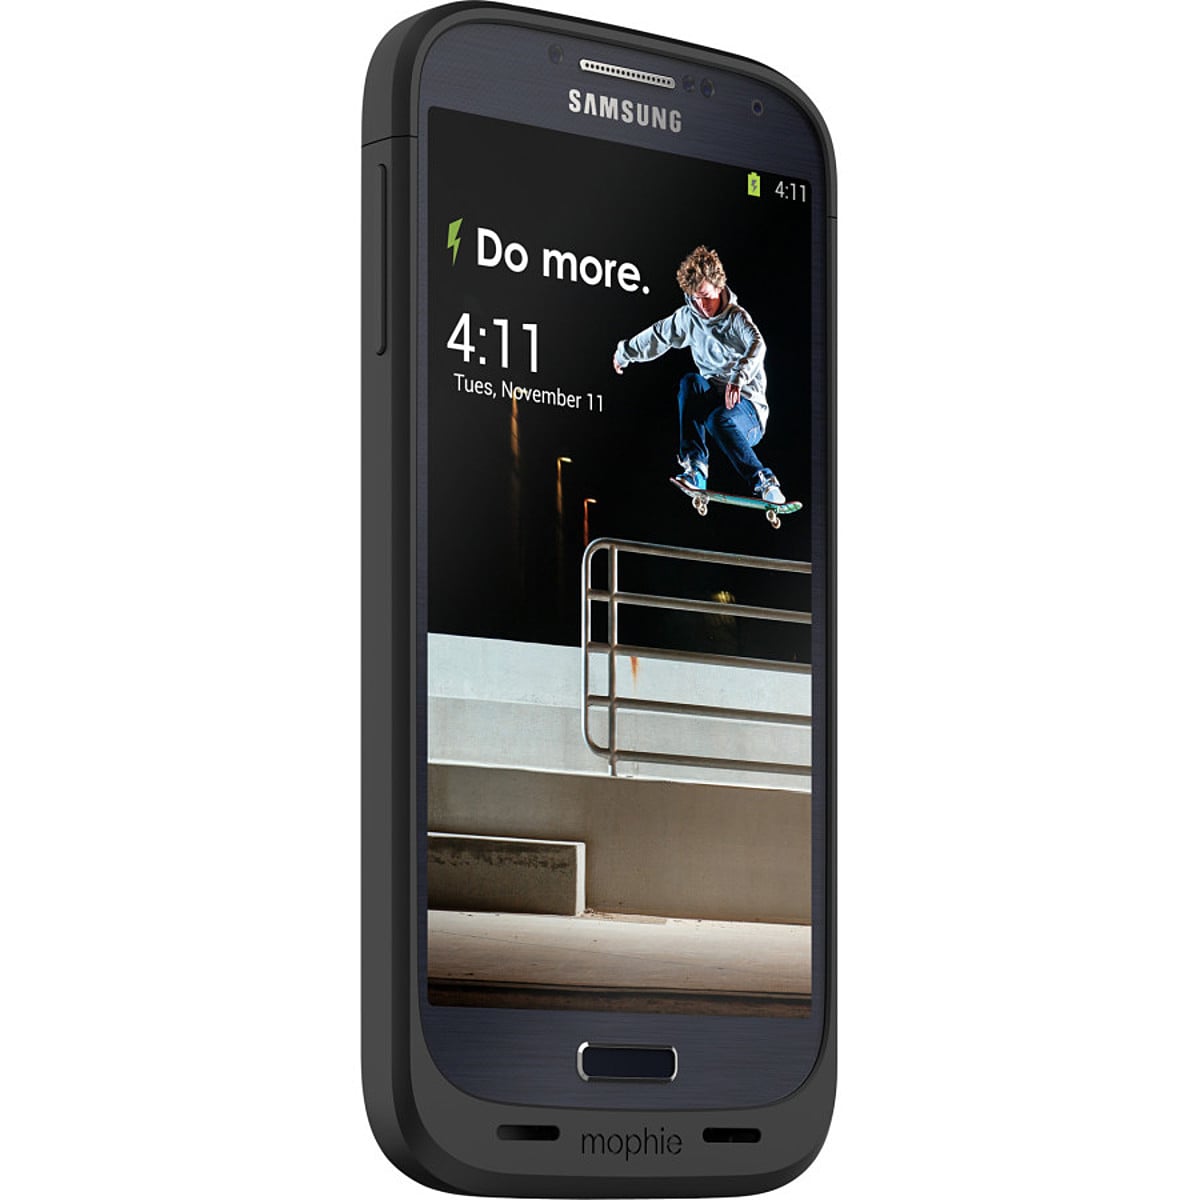 mophie Juice Pack - Samsung Galaxy S4 Black, One Size